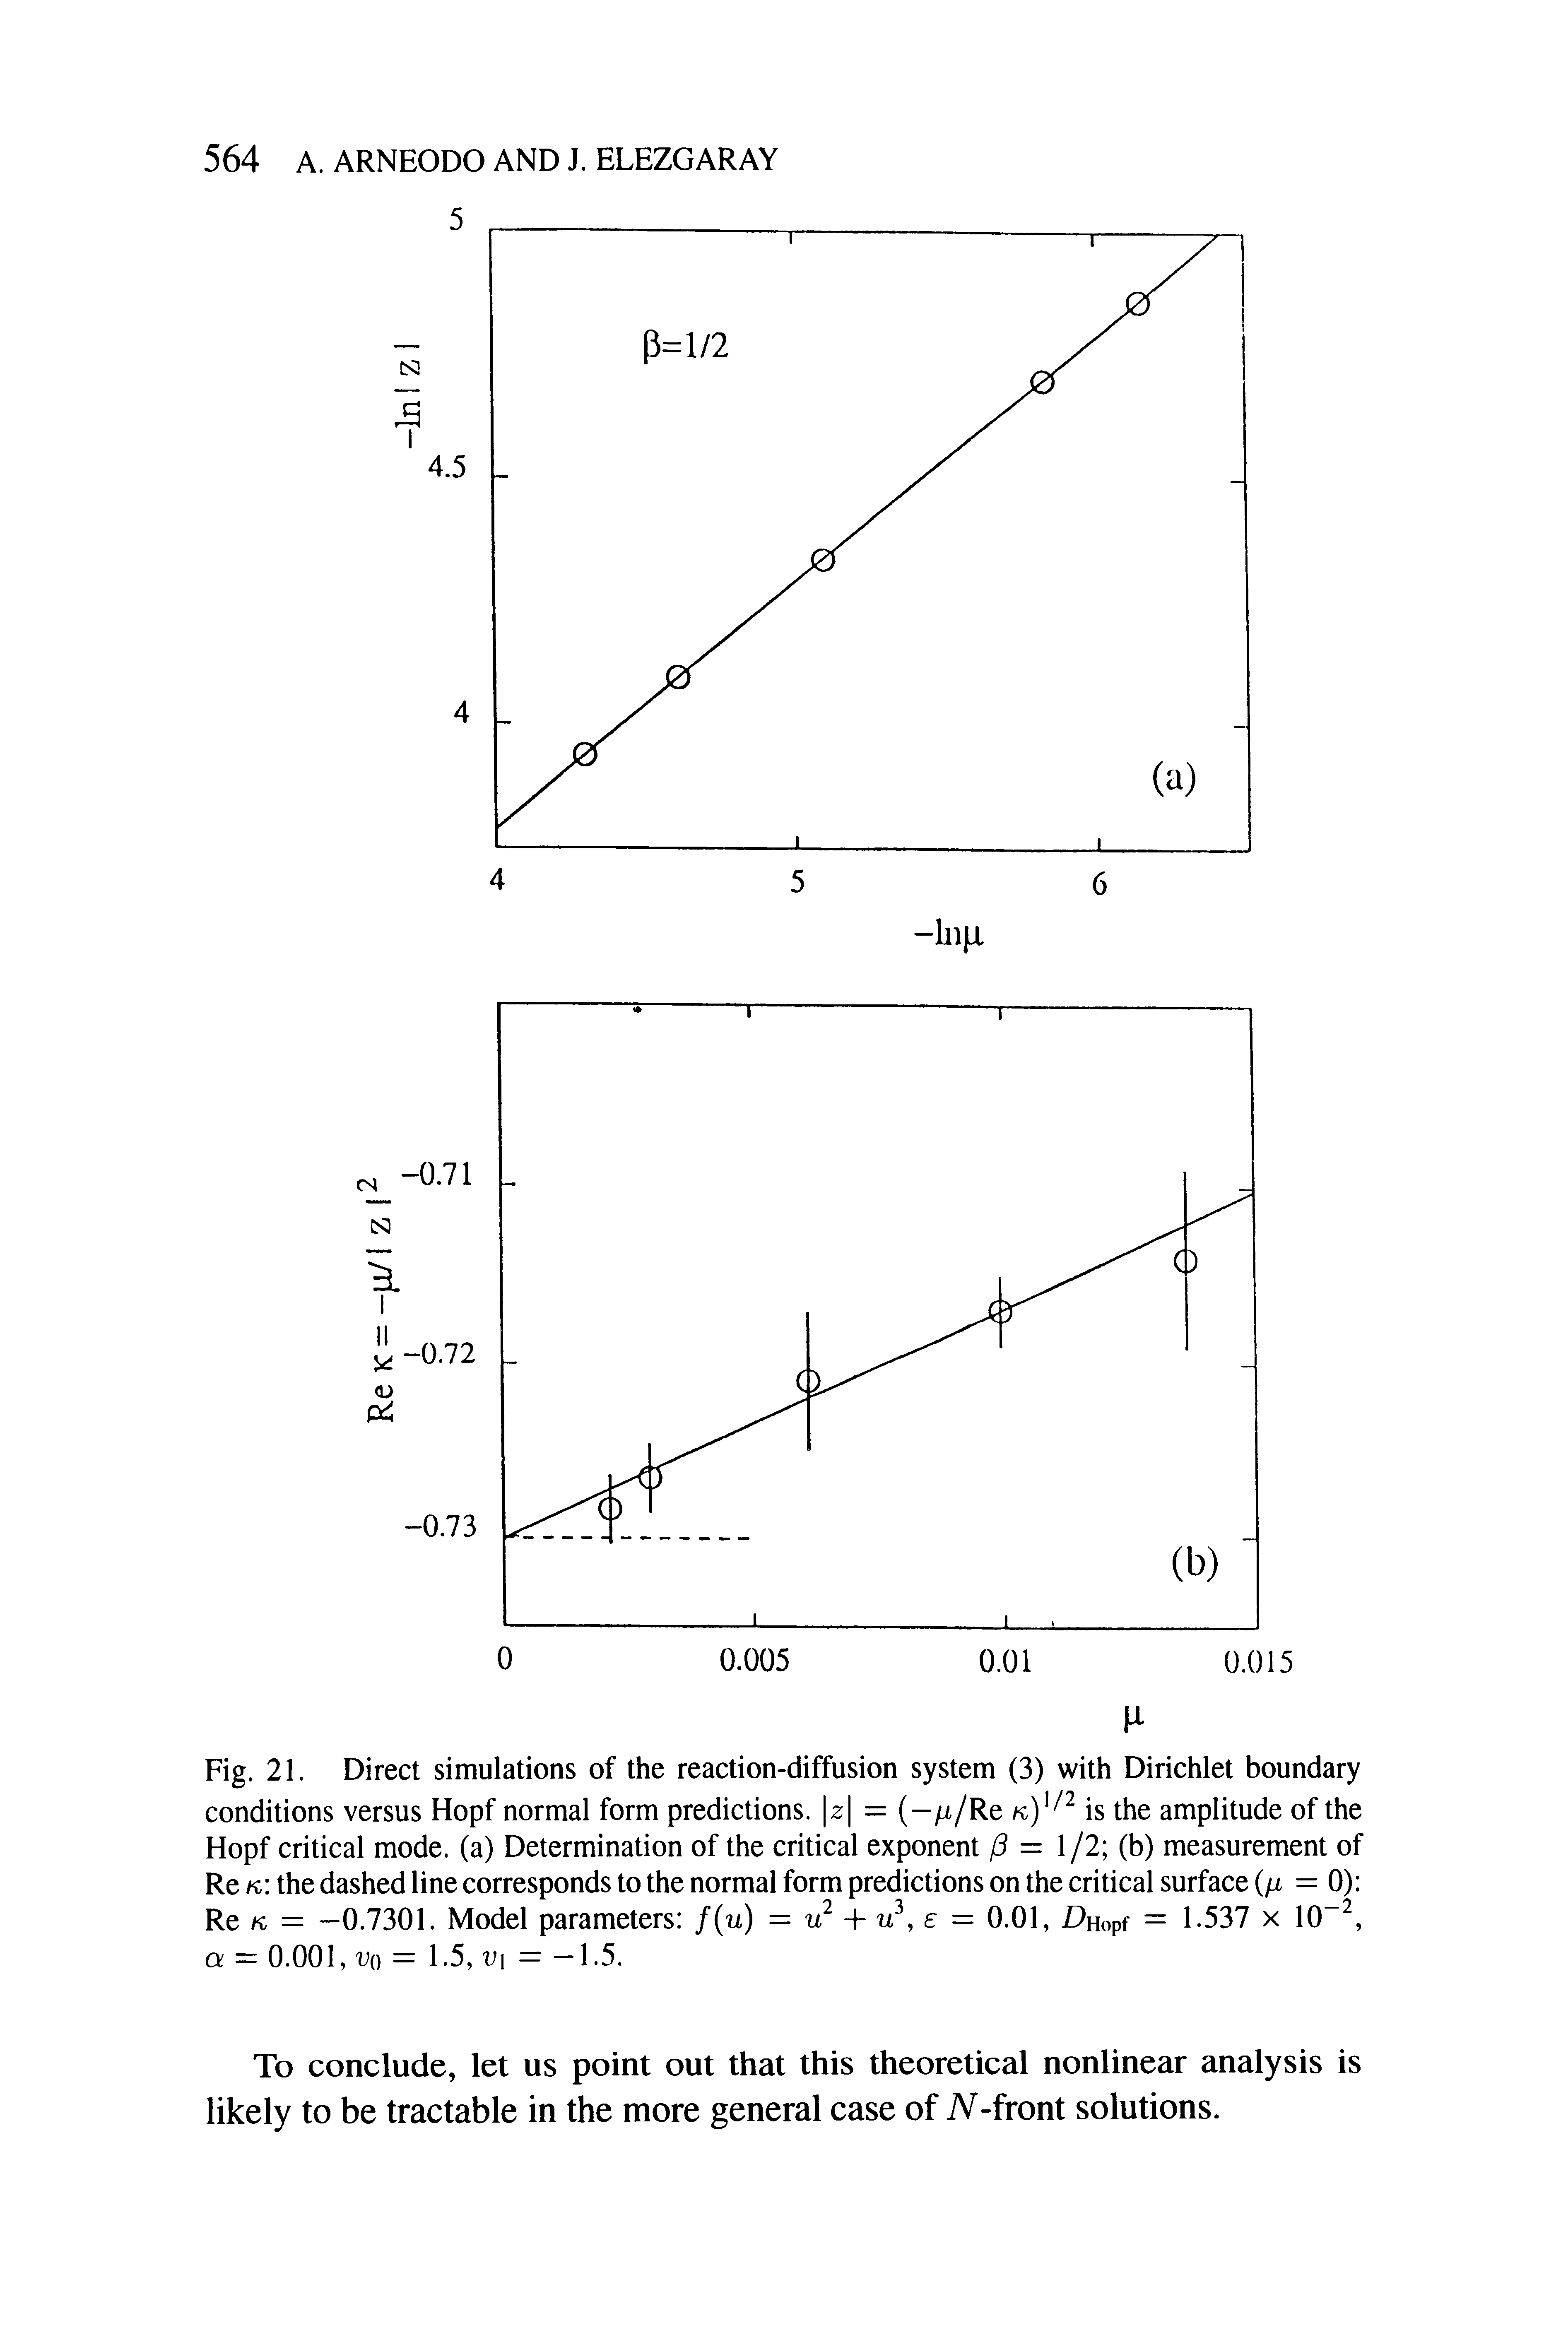 Fig. 21. Direct simulations of the reaction-diffusion system (3) with Dirichlet boundary conditions versus Hopf normal form predictions. z = (- u/Re is the amplitude of the Hopf critical mode, (a) Determination of the critical exponent (3 = 1/2 (b) measurement of Re K, the dashed line corresponds to the normal form predictions on the critical surface (fi =0) Re AC = —0.7301. Model parameters f u) = y e = 0.01, Z Hopf = 1.537 x 10 , a = 0.001, V ) = 1.5, v = —1.5.